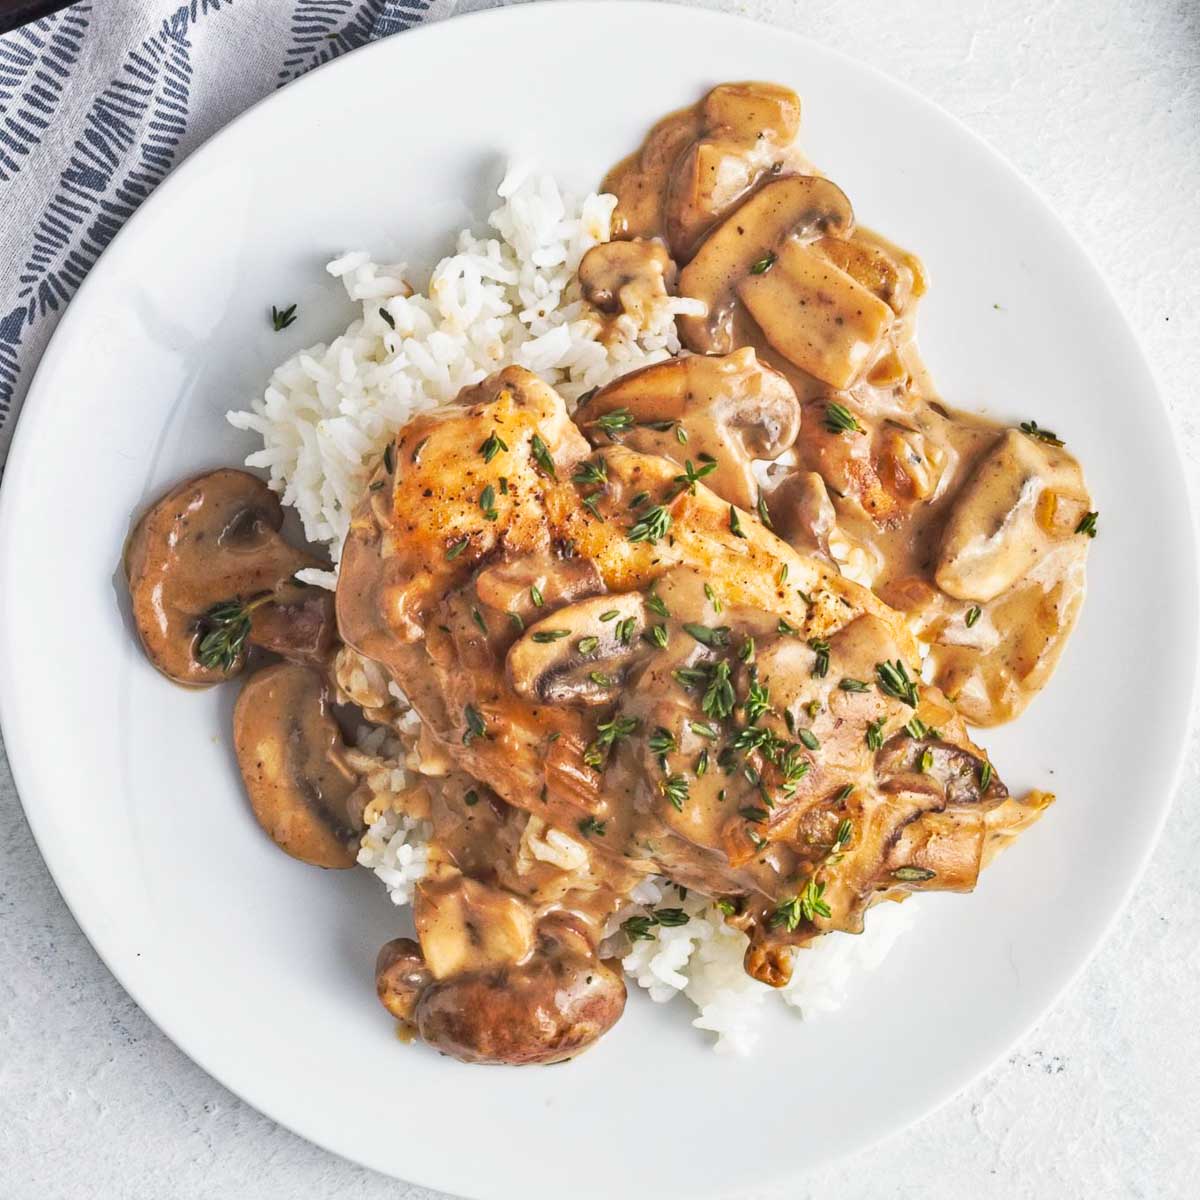 Overhead image of creamy chicken with mushrooms over rice.